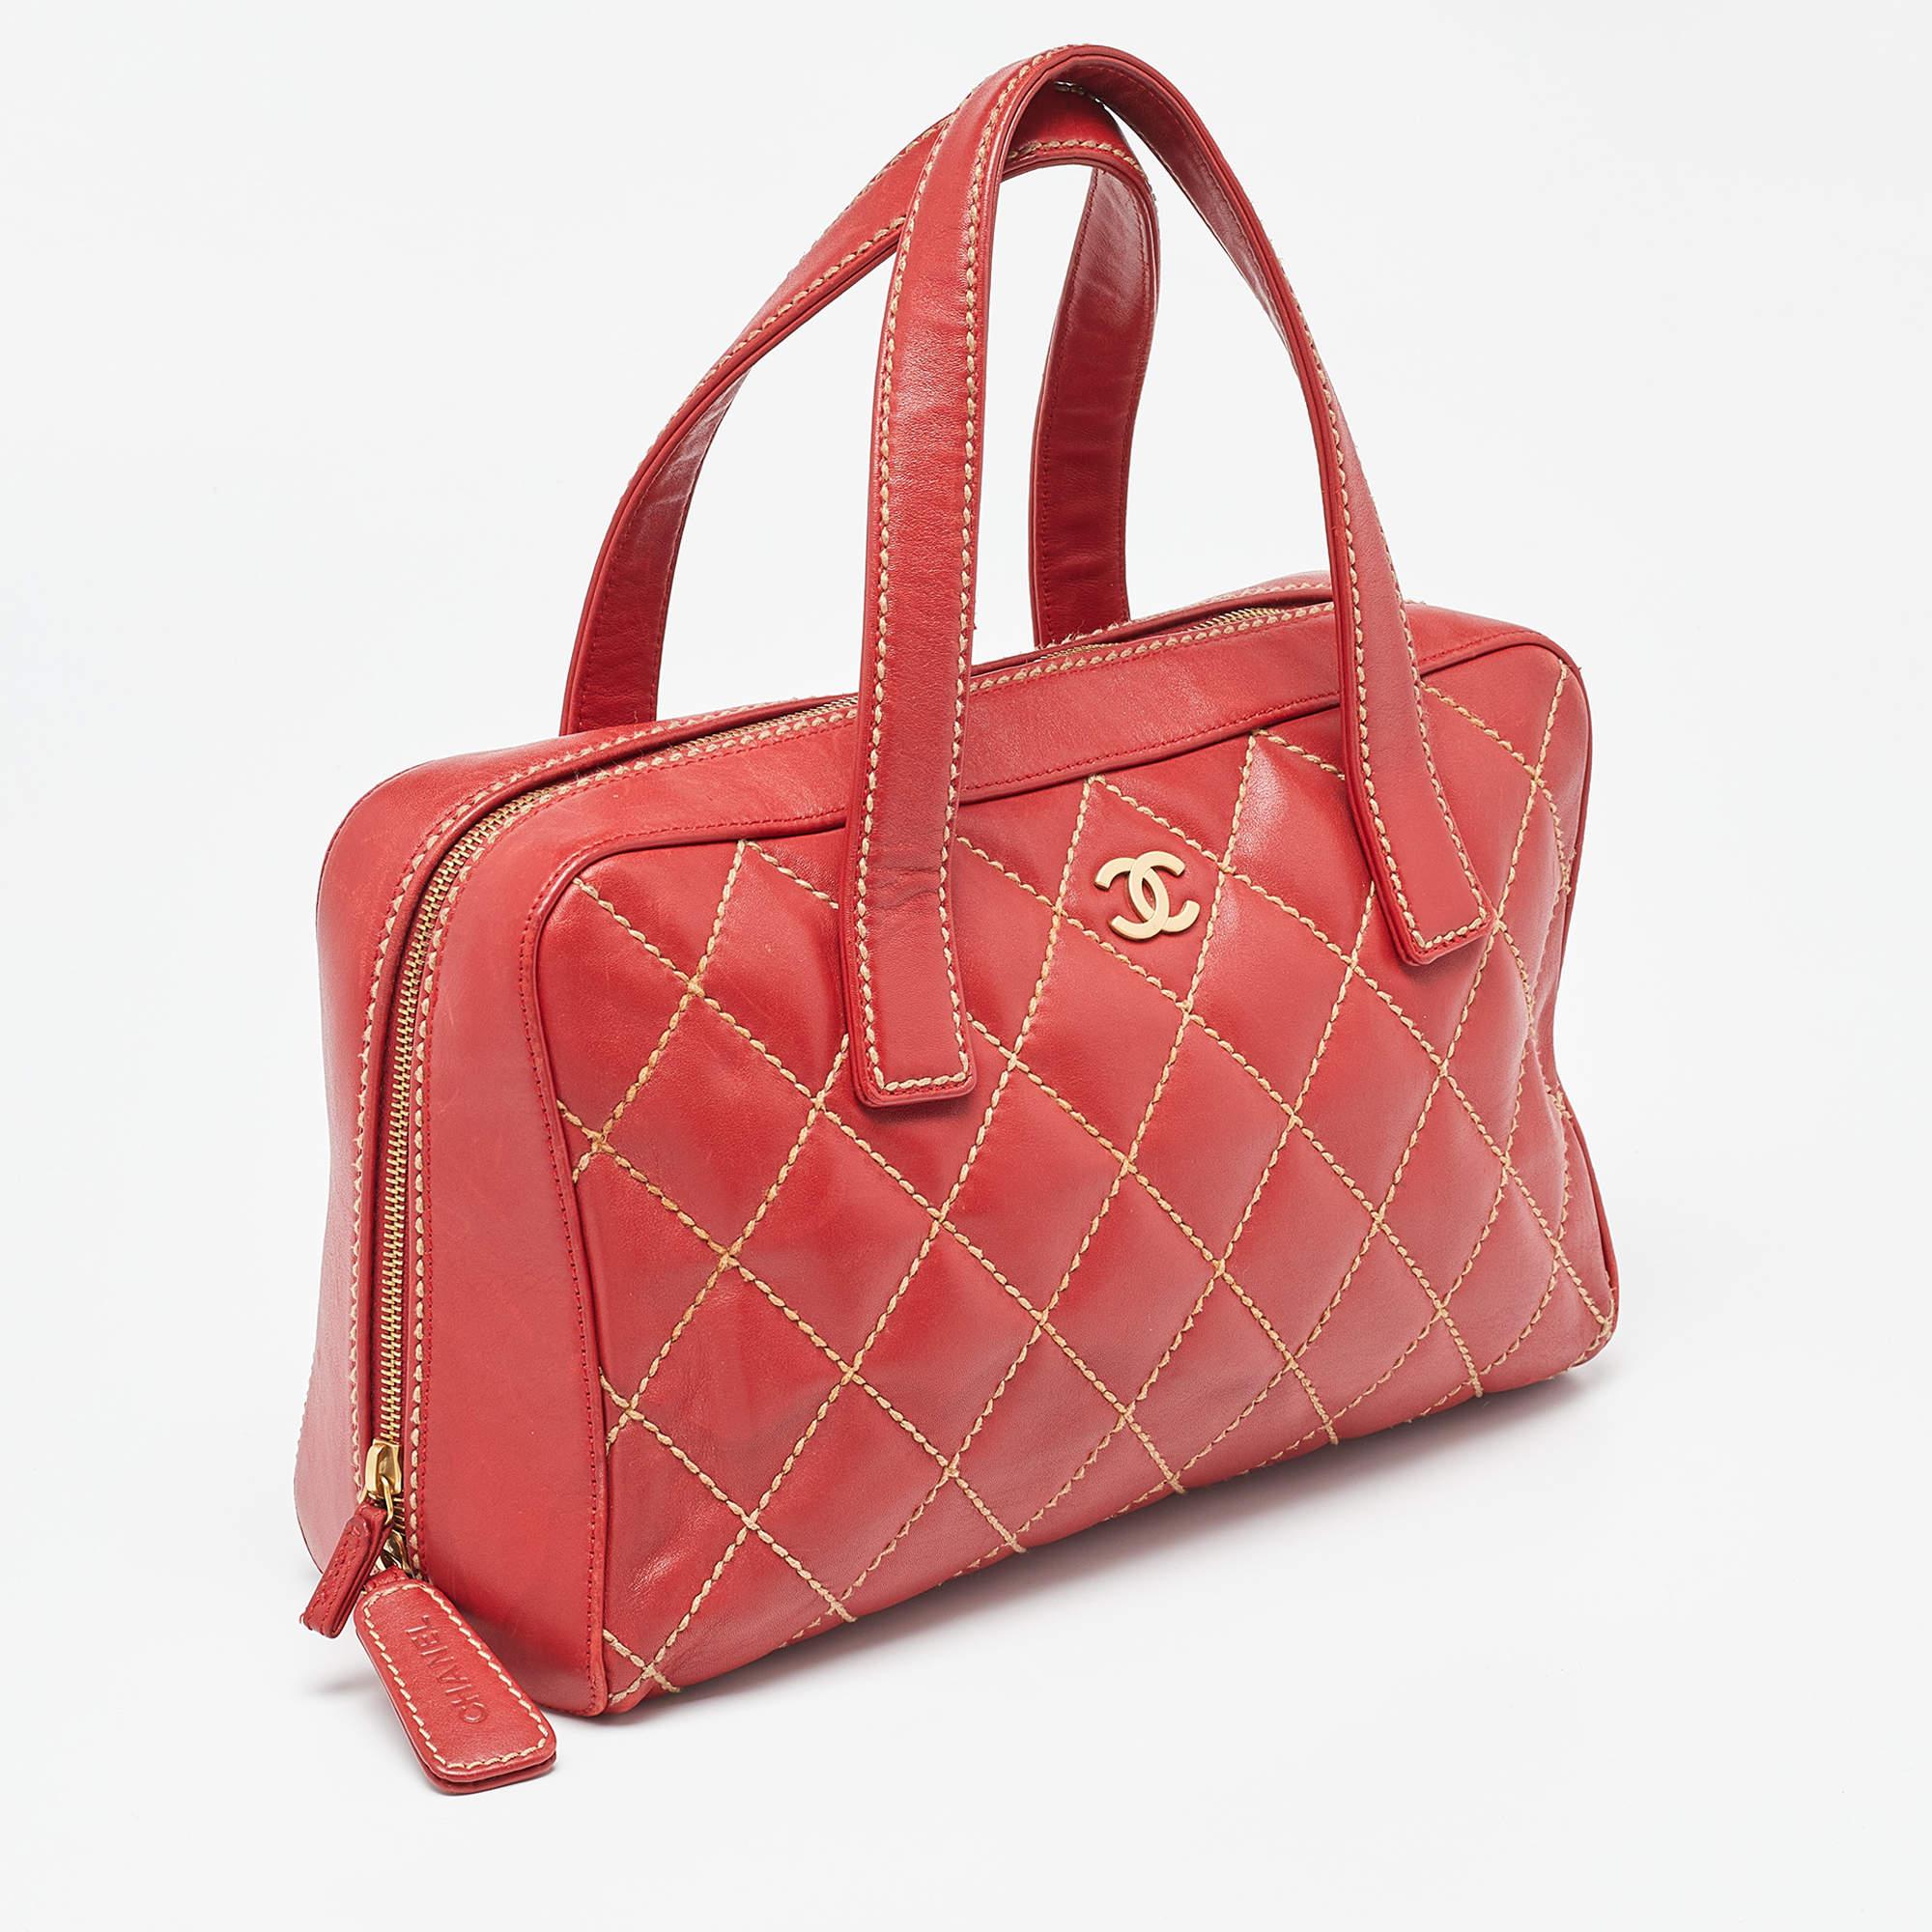 Women's Chanel Red Quilted Leather Surpique Bowler Bag For Sale